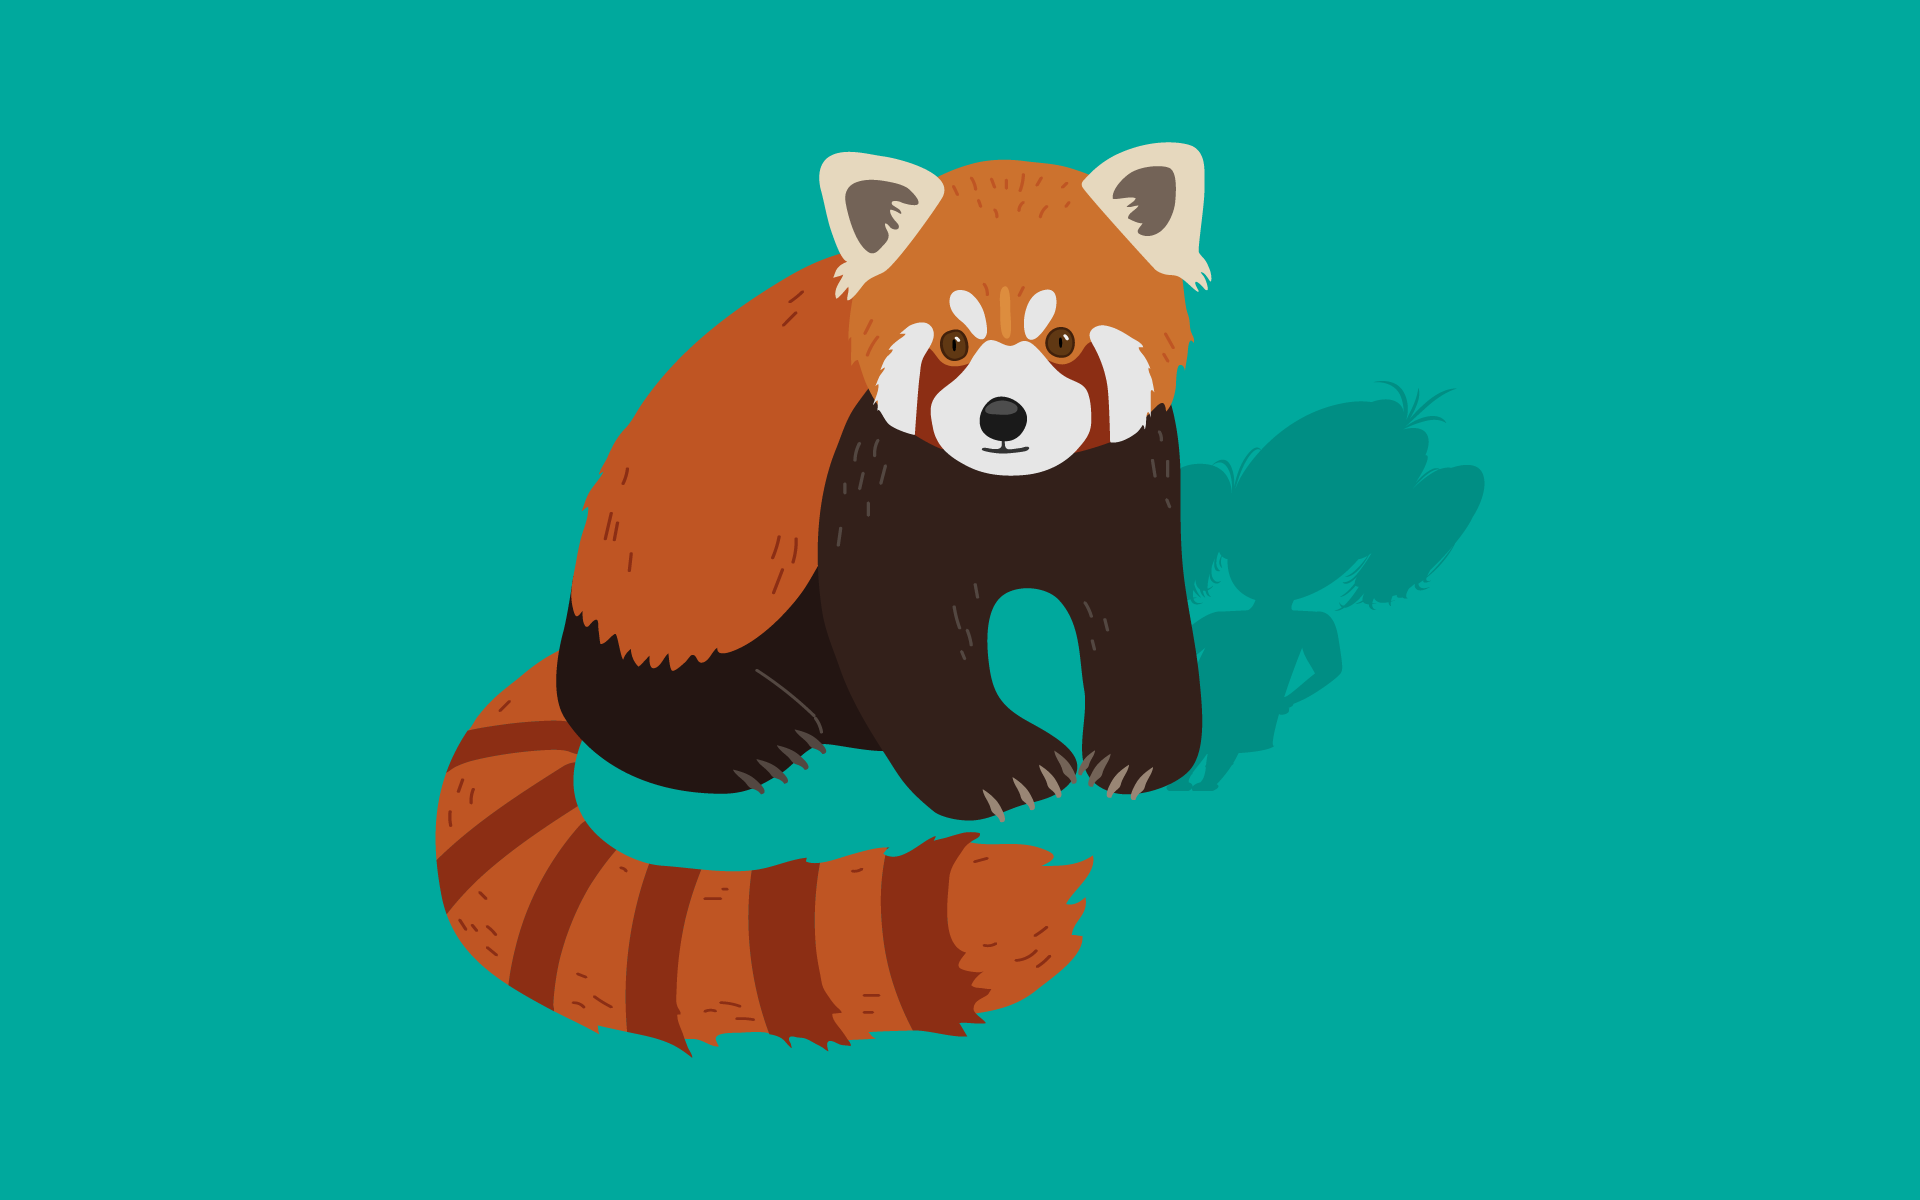 What a big red panda can teach us about the joy and chaos of teenage life